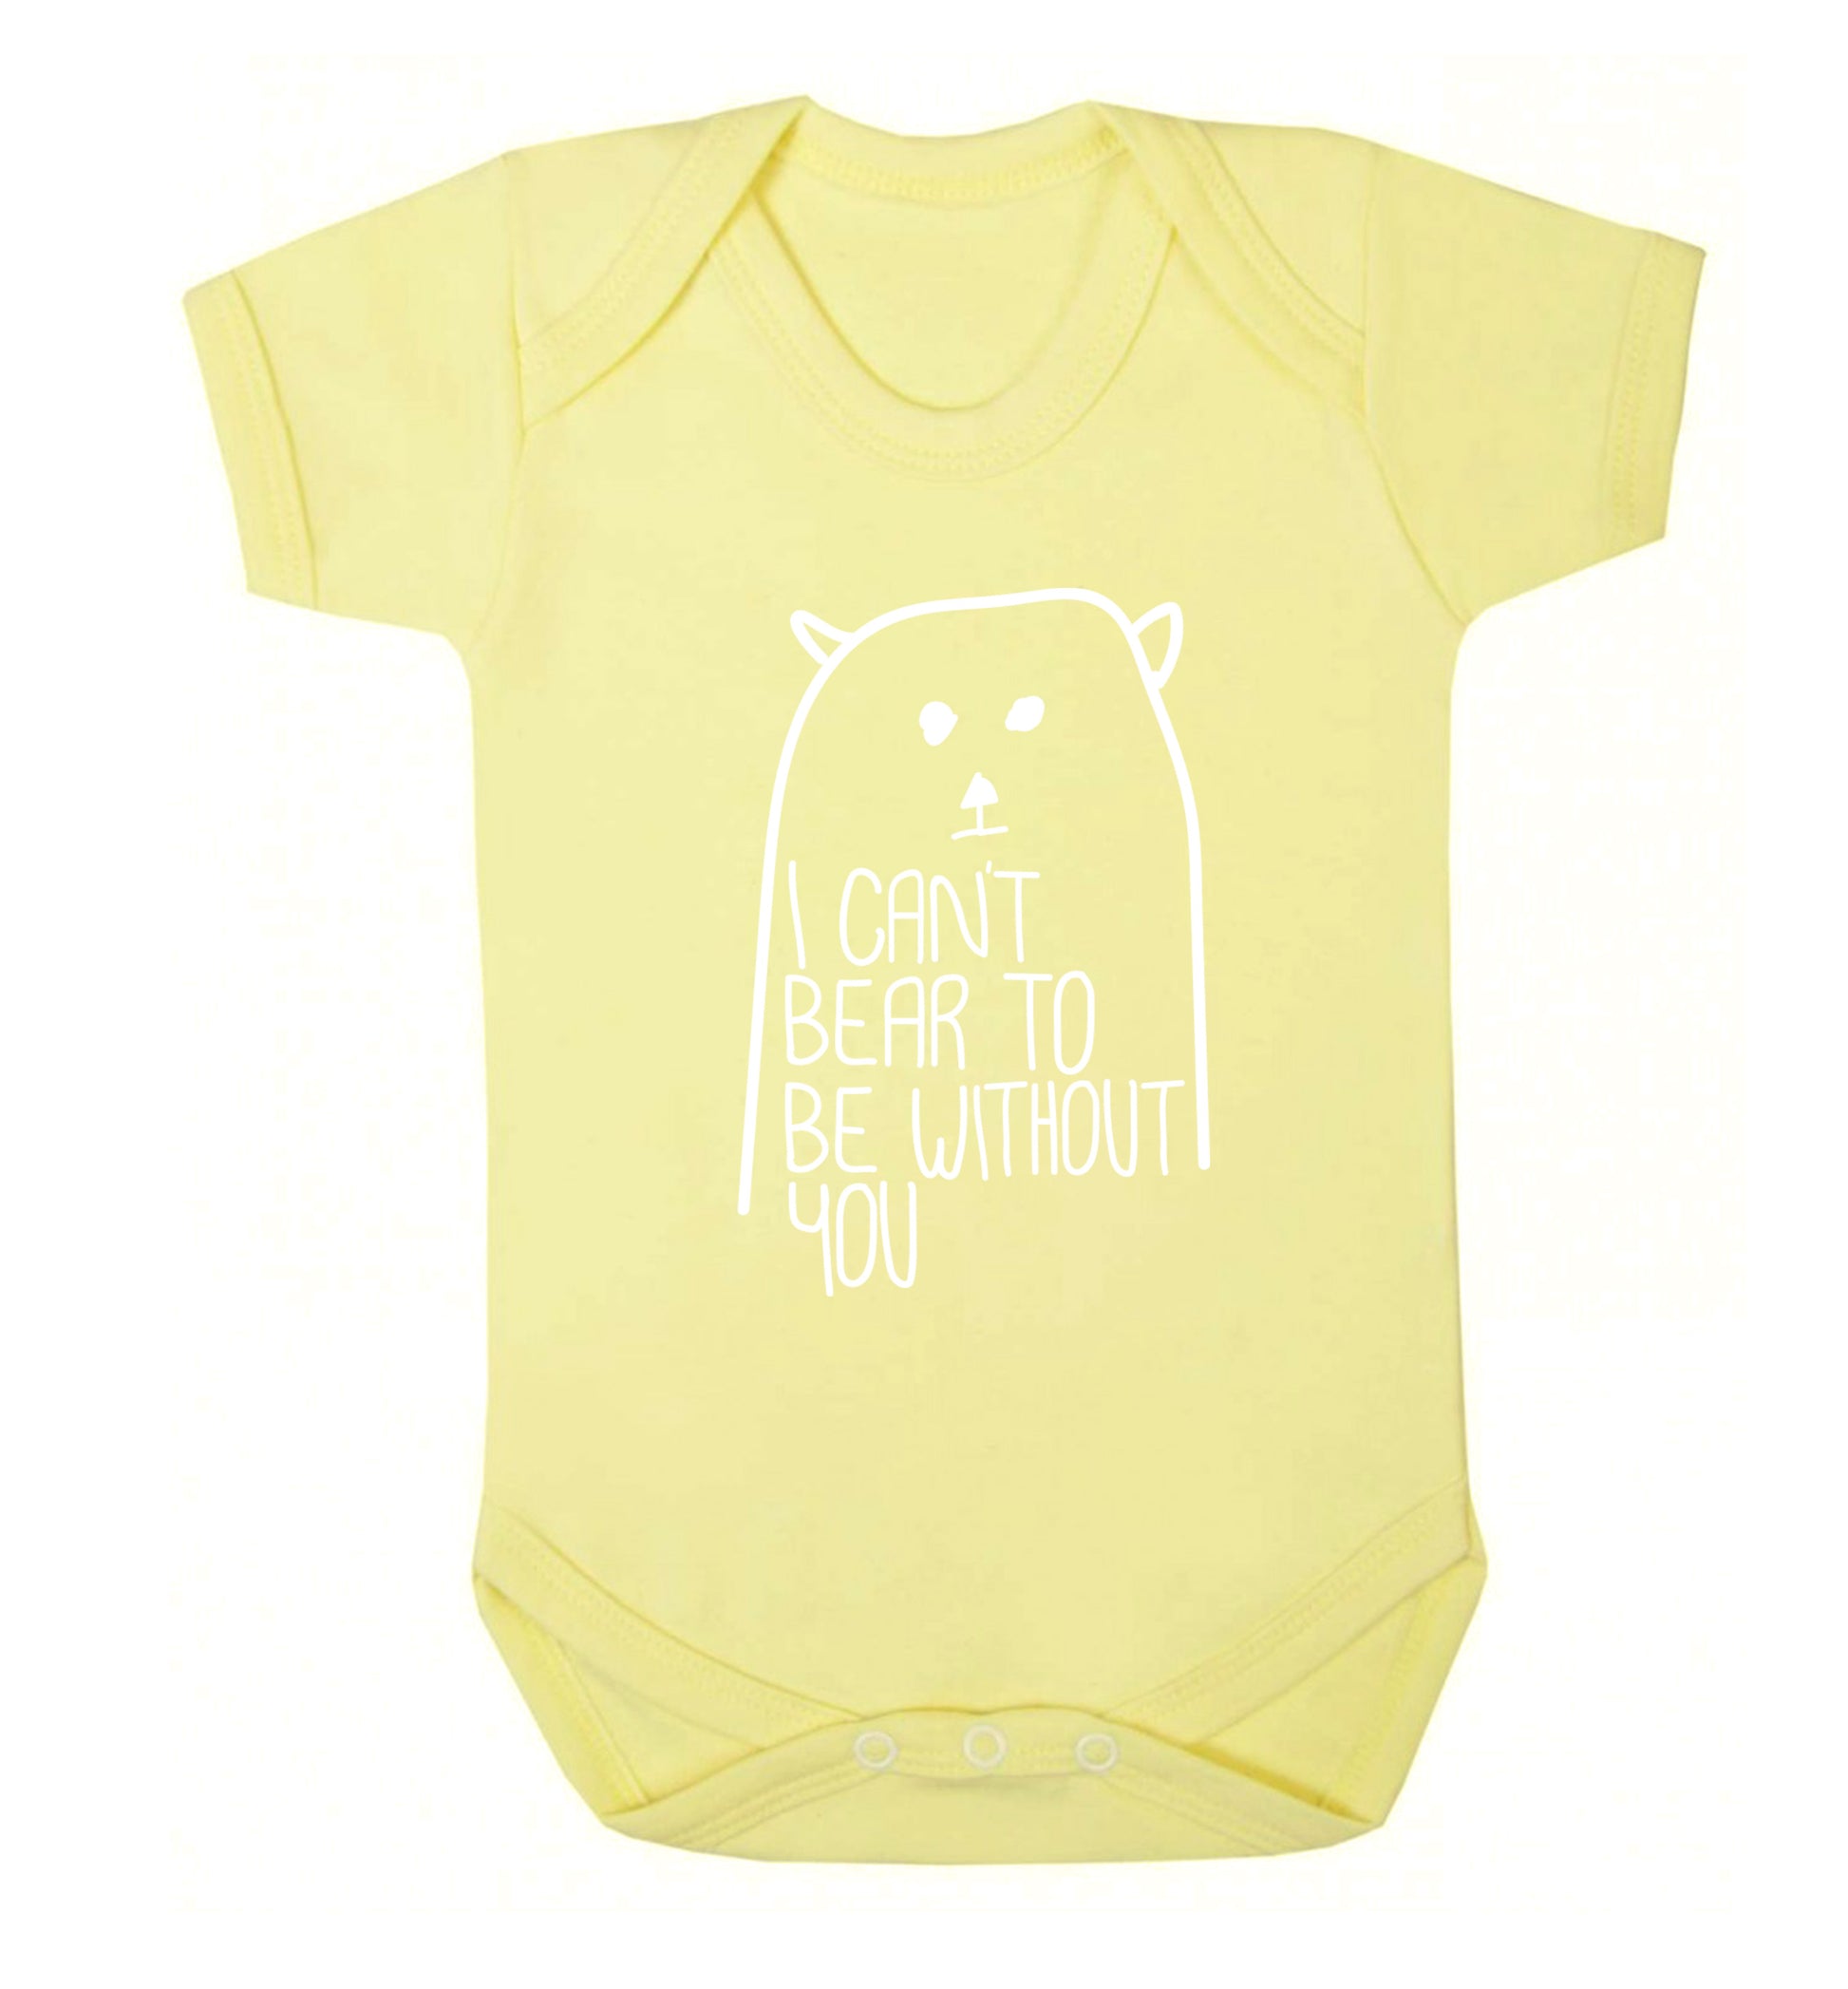 I can't bear to be without you Baby Vest pale yellow 18-24 months